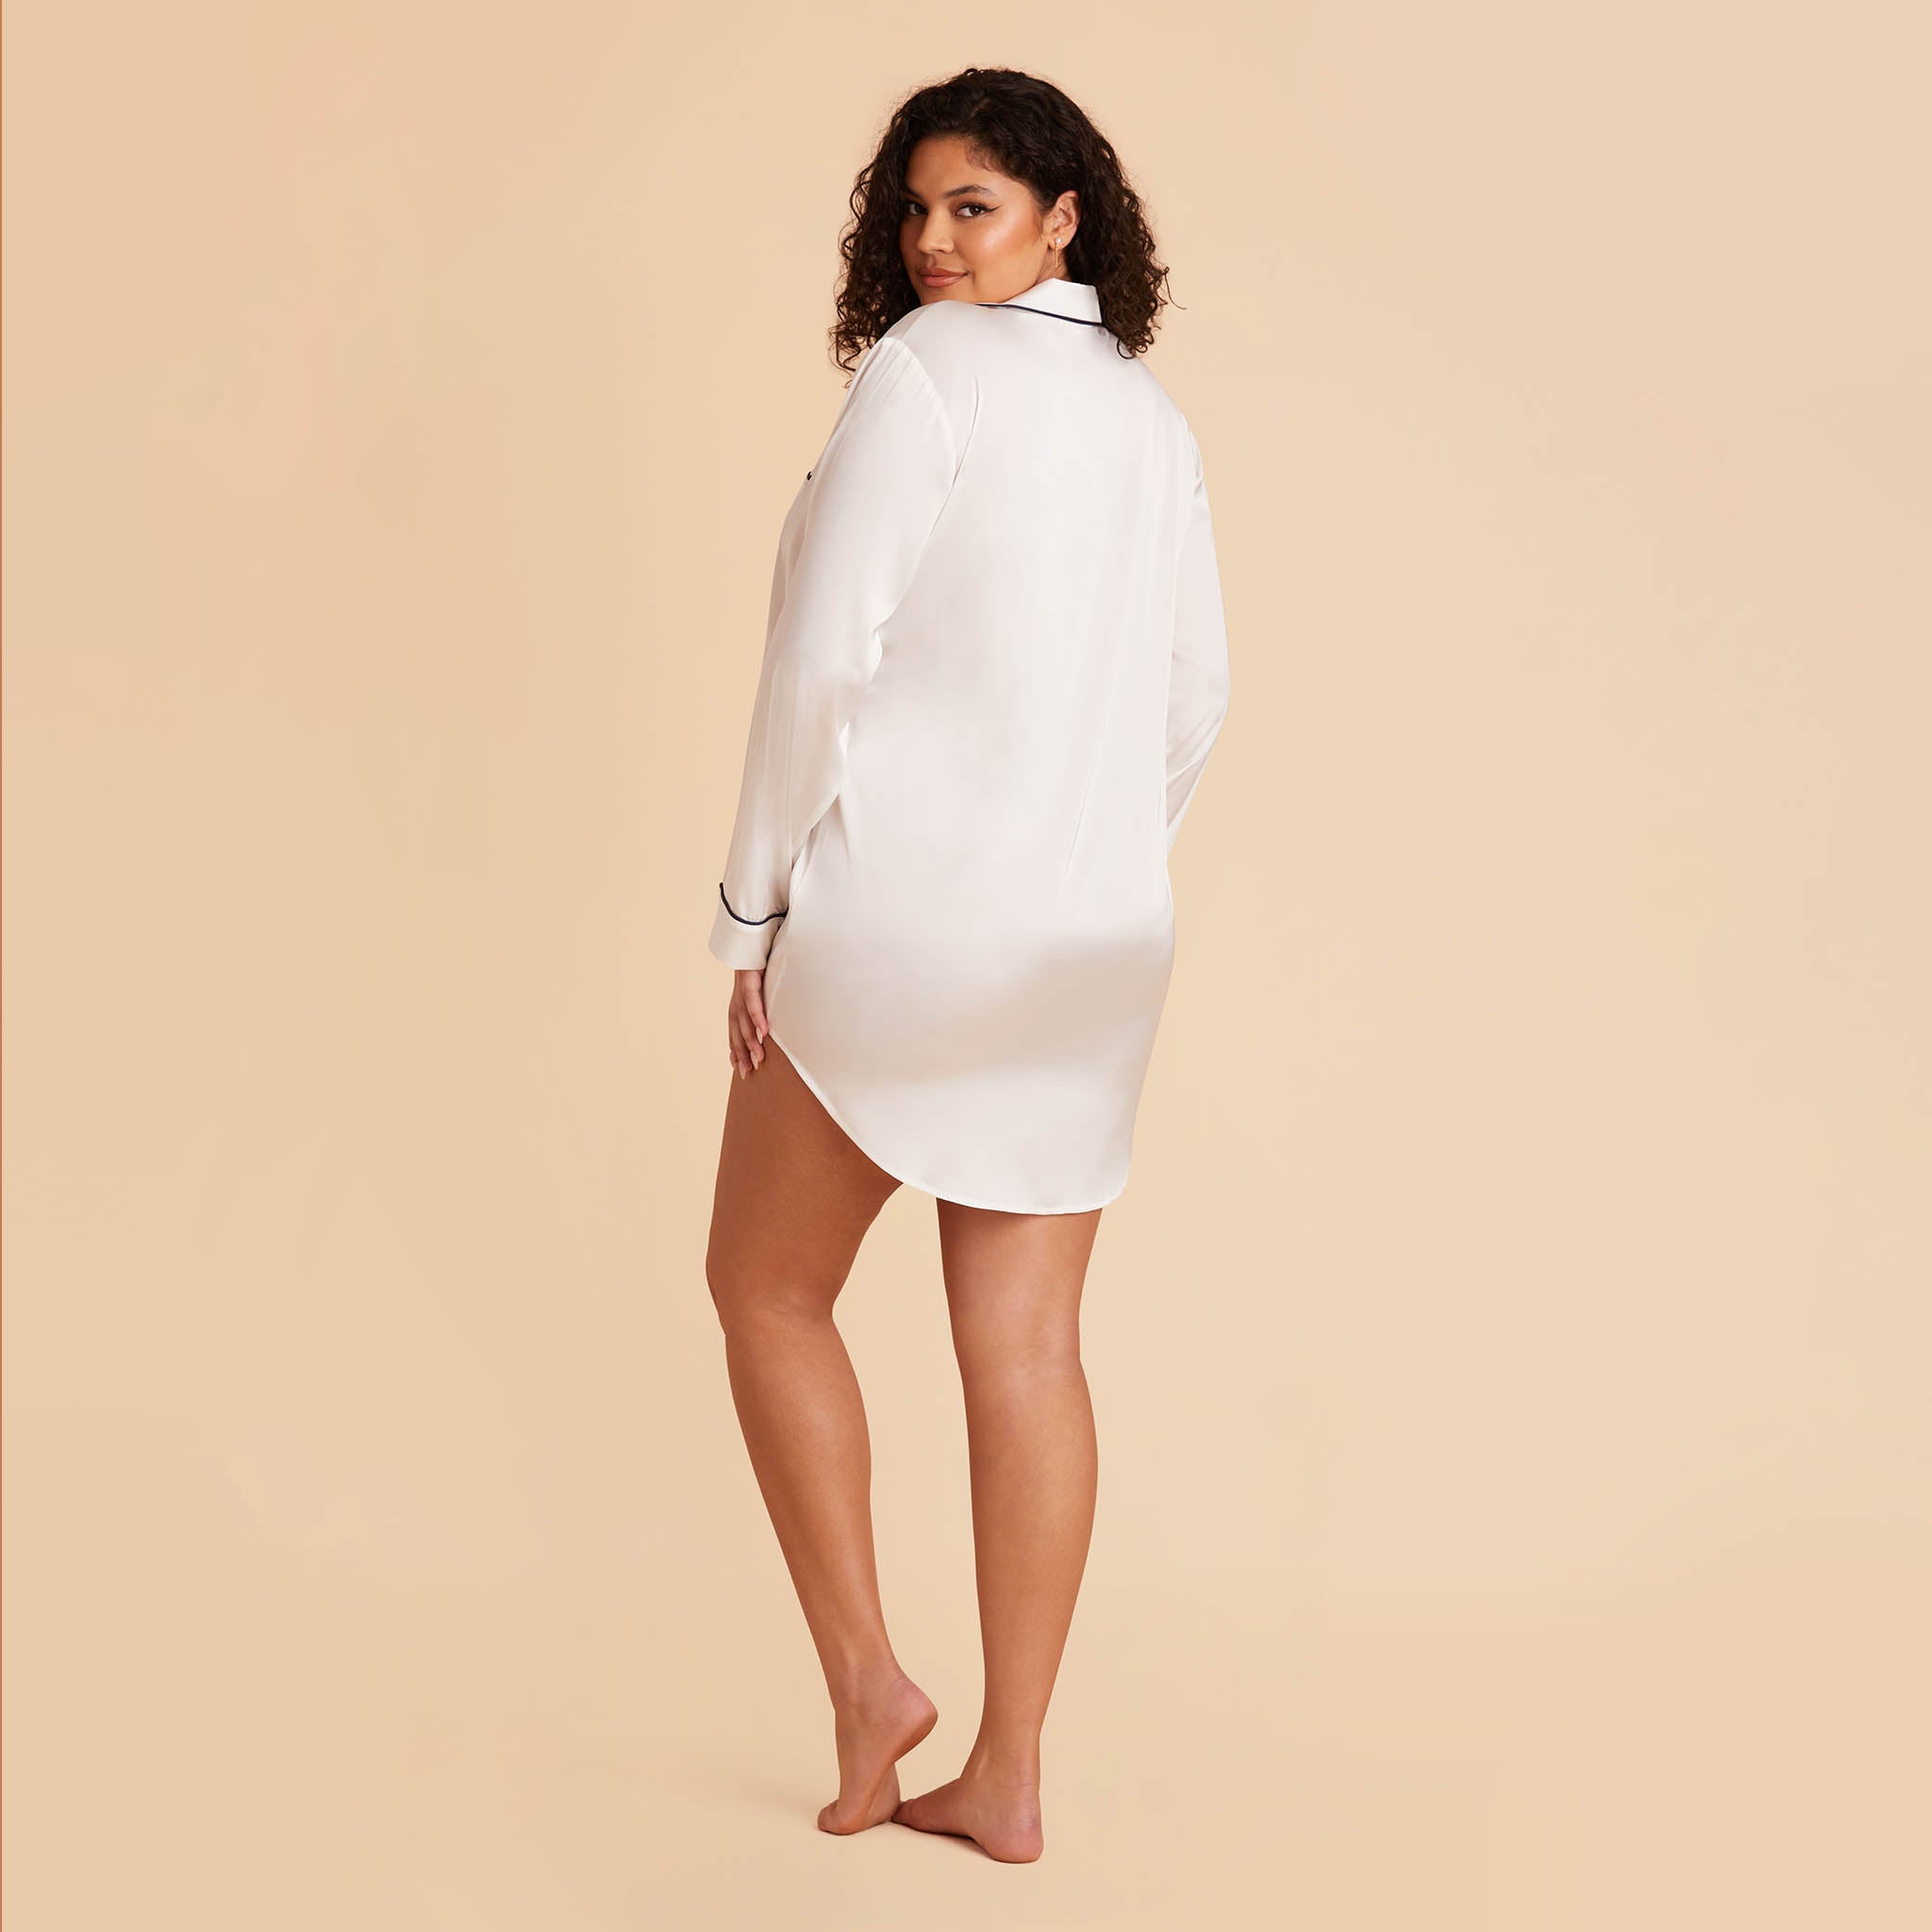 Plus Size Satin Sleepshirt in ivory by Birdy Grey, front view